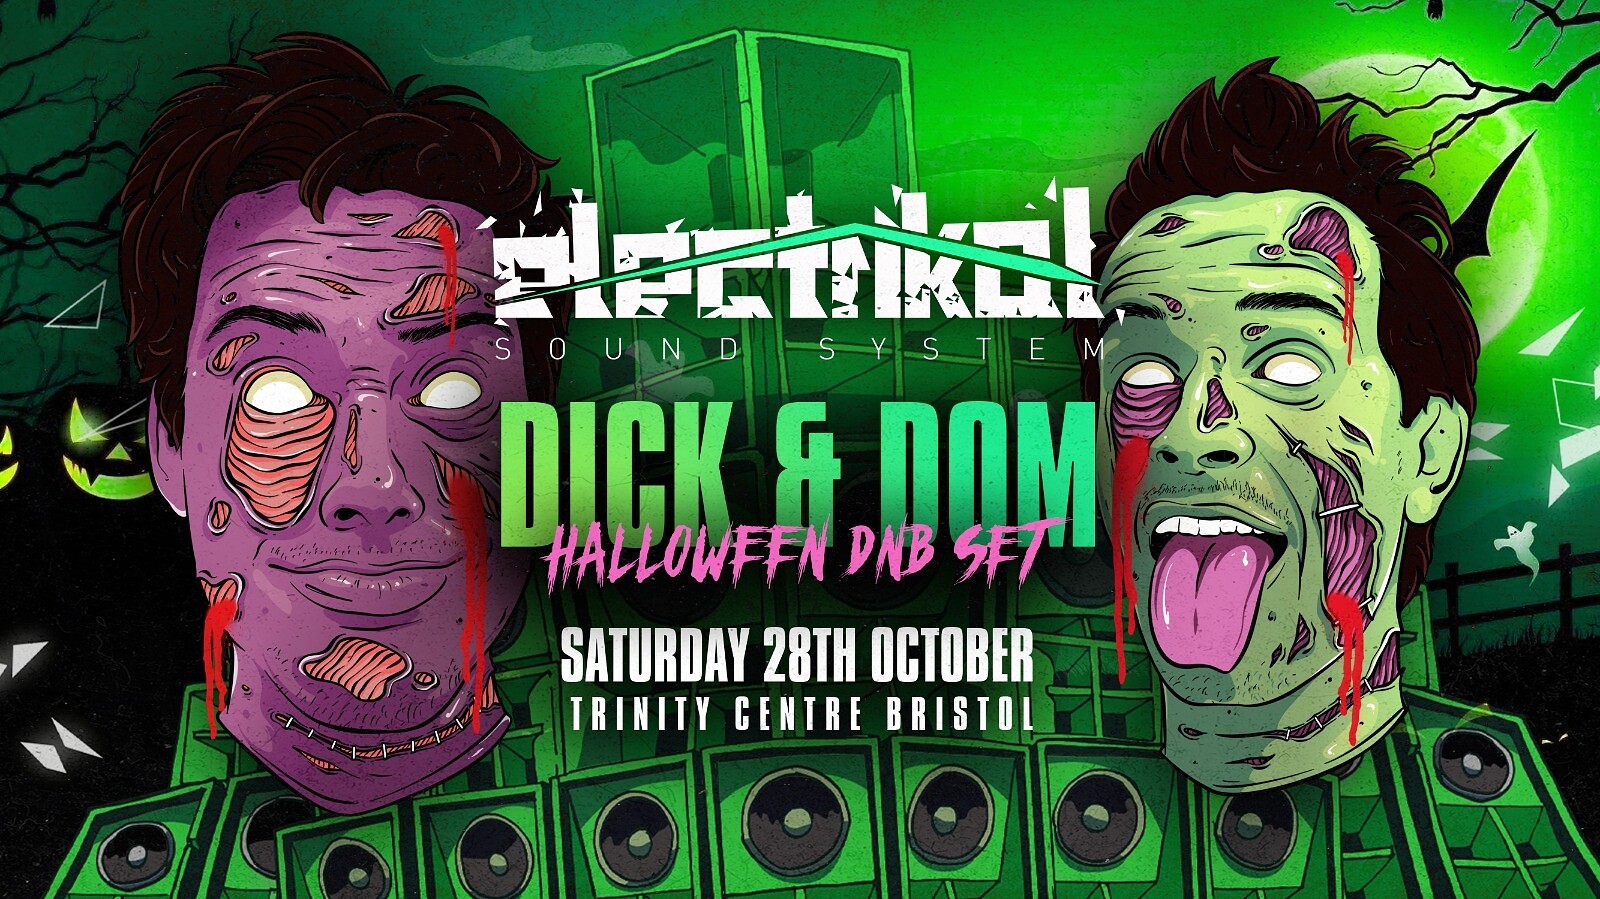 Electrikal Sound System - Dick & Dom Halloween DNB at The Trinity Centre